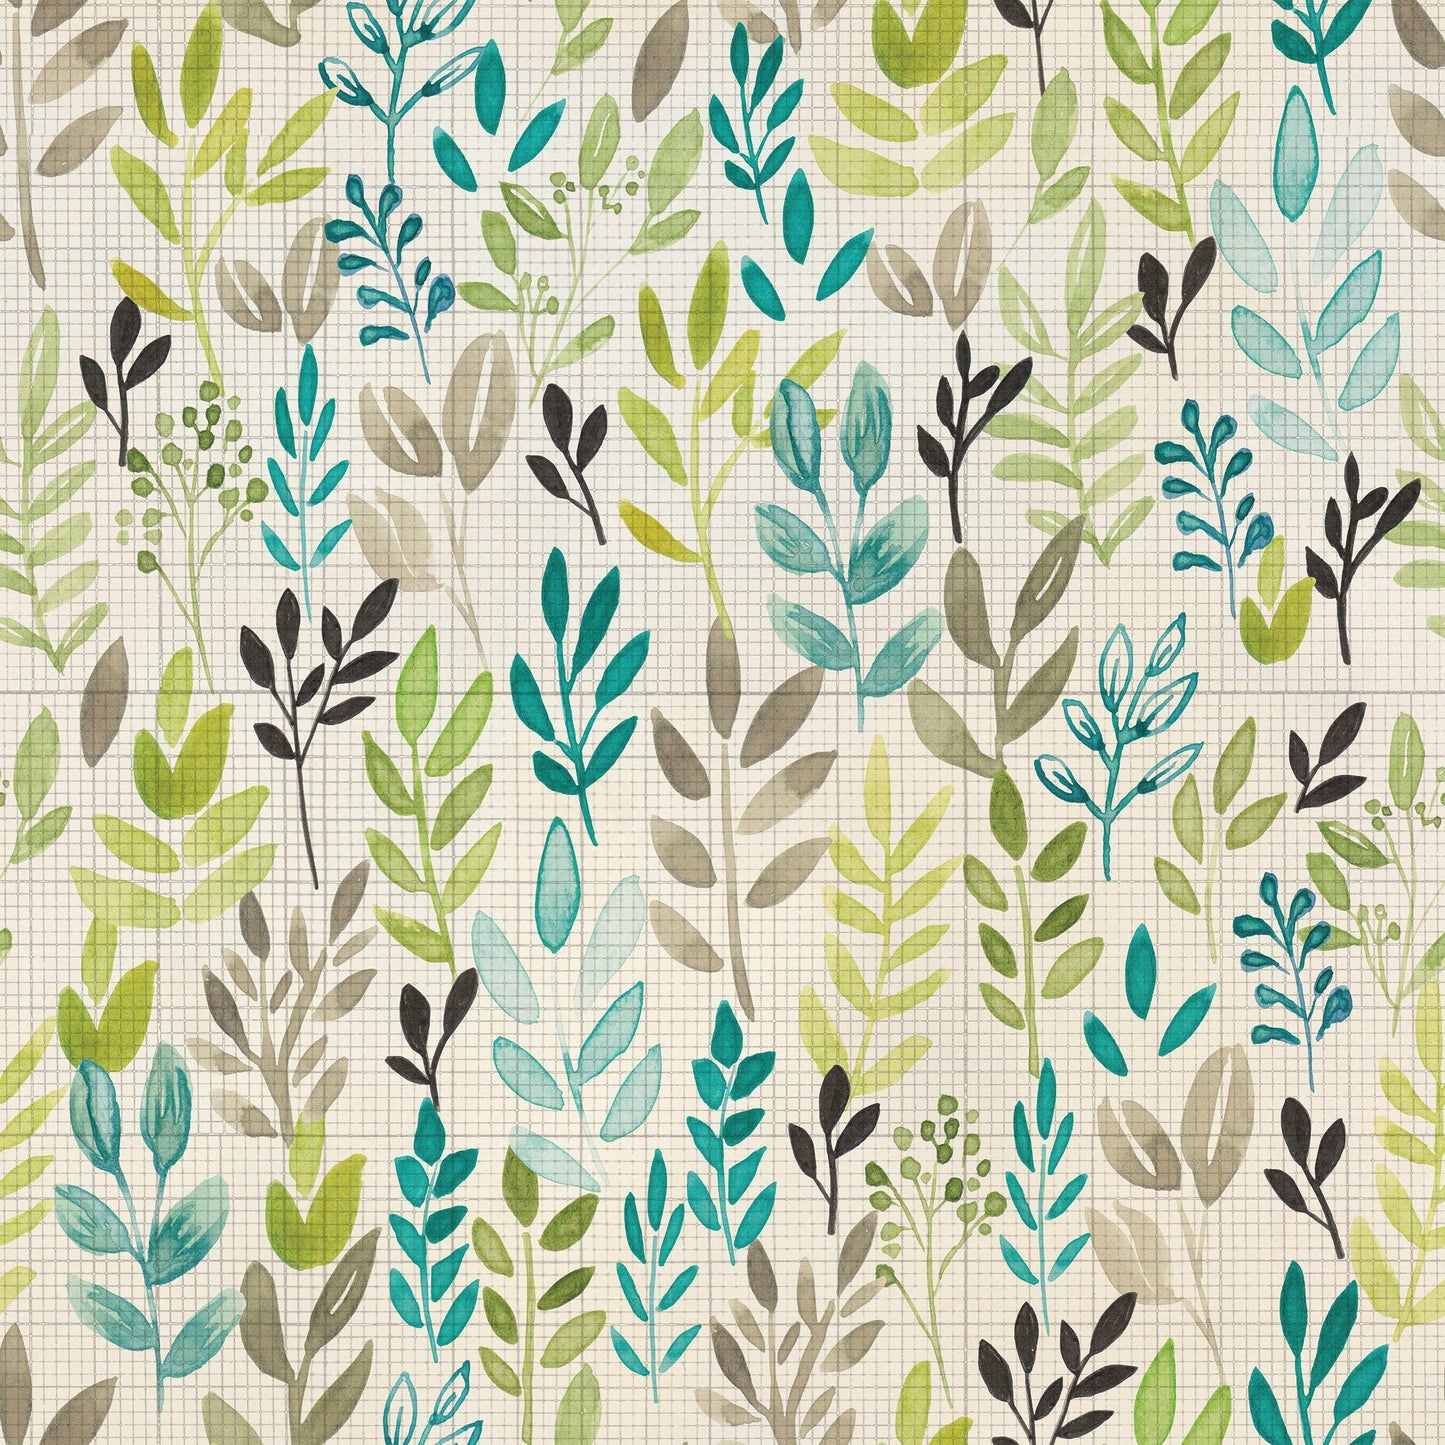 Vintage Sprigs on Bamboo Stretch French Terry Fabric - Nature's Fabrics